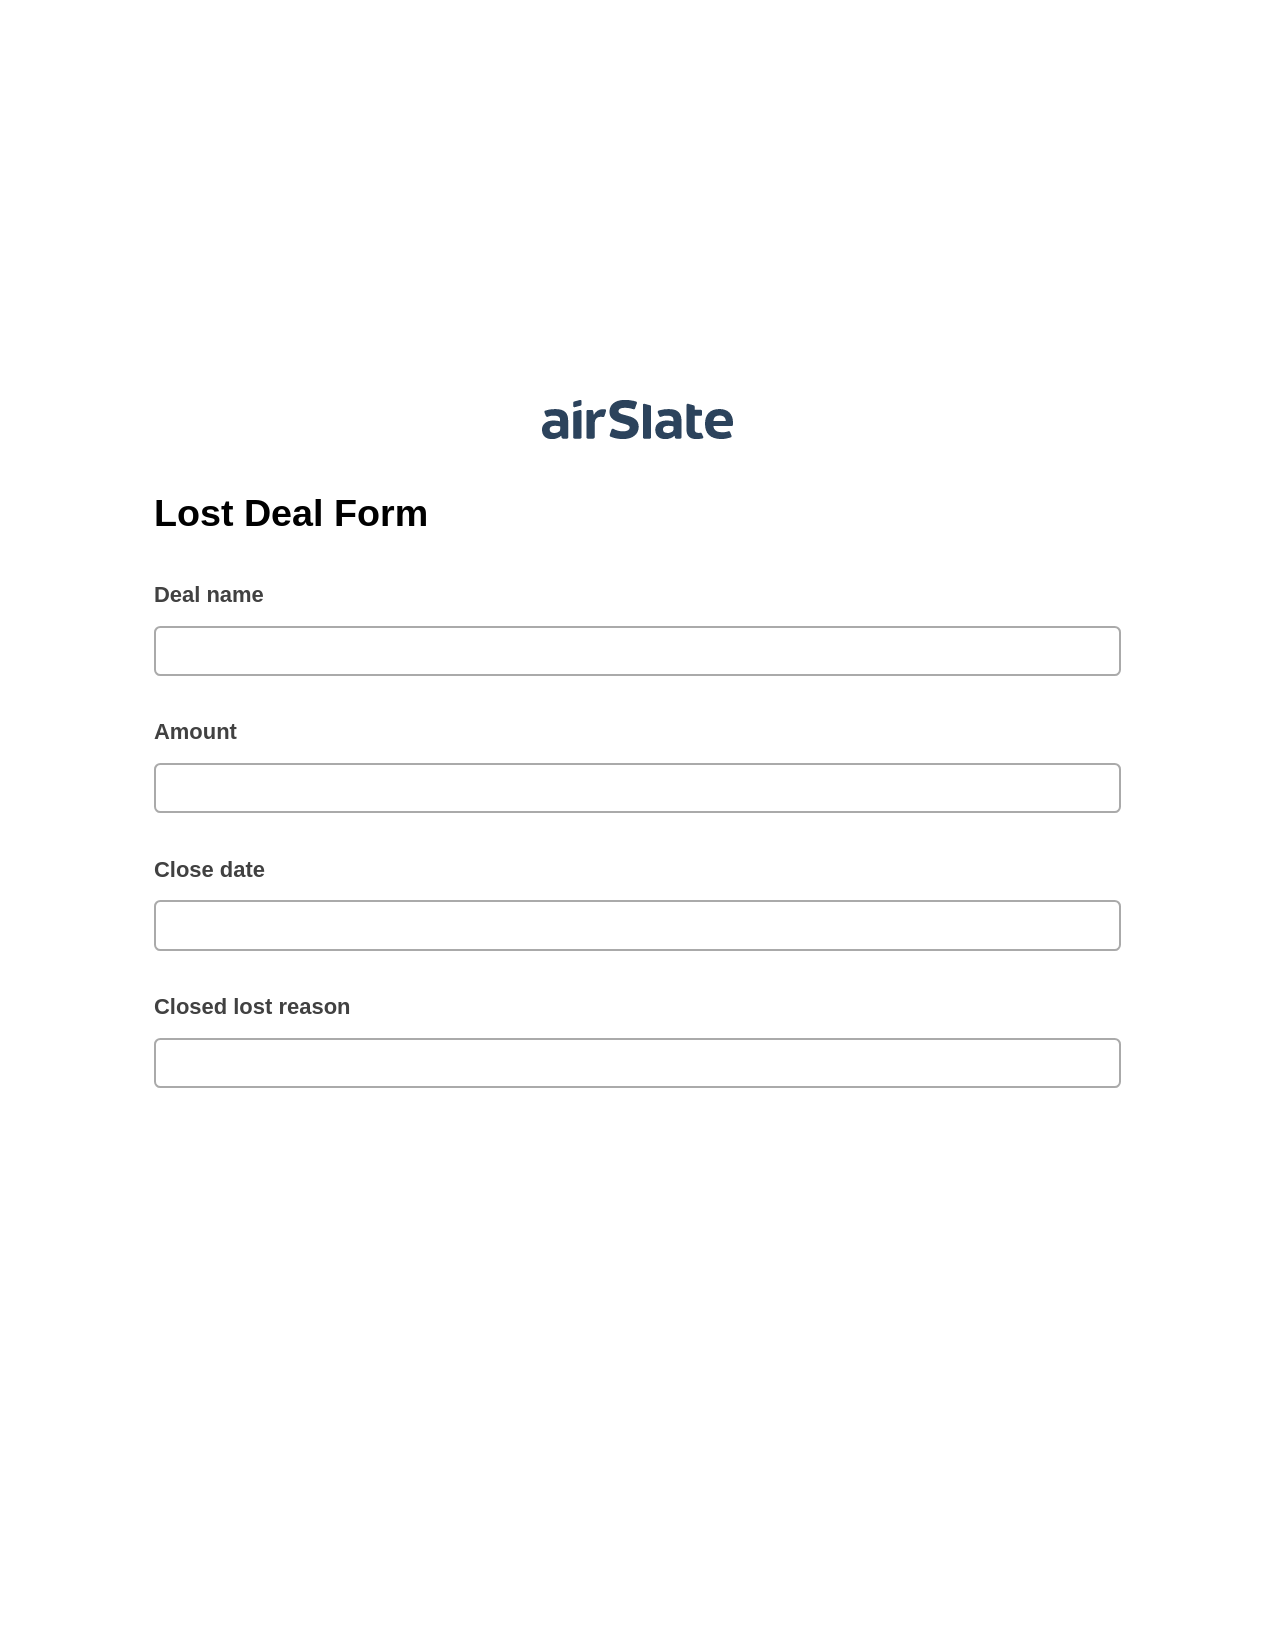 Lost Deal Form Pre-fill from CSV File Bot, Hide Signatures Bot, Export to Salesforce Record Bot